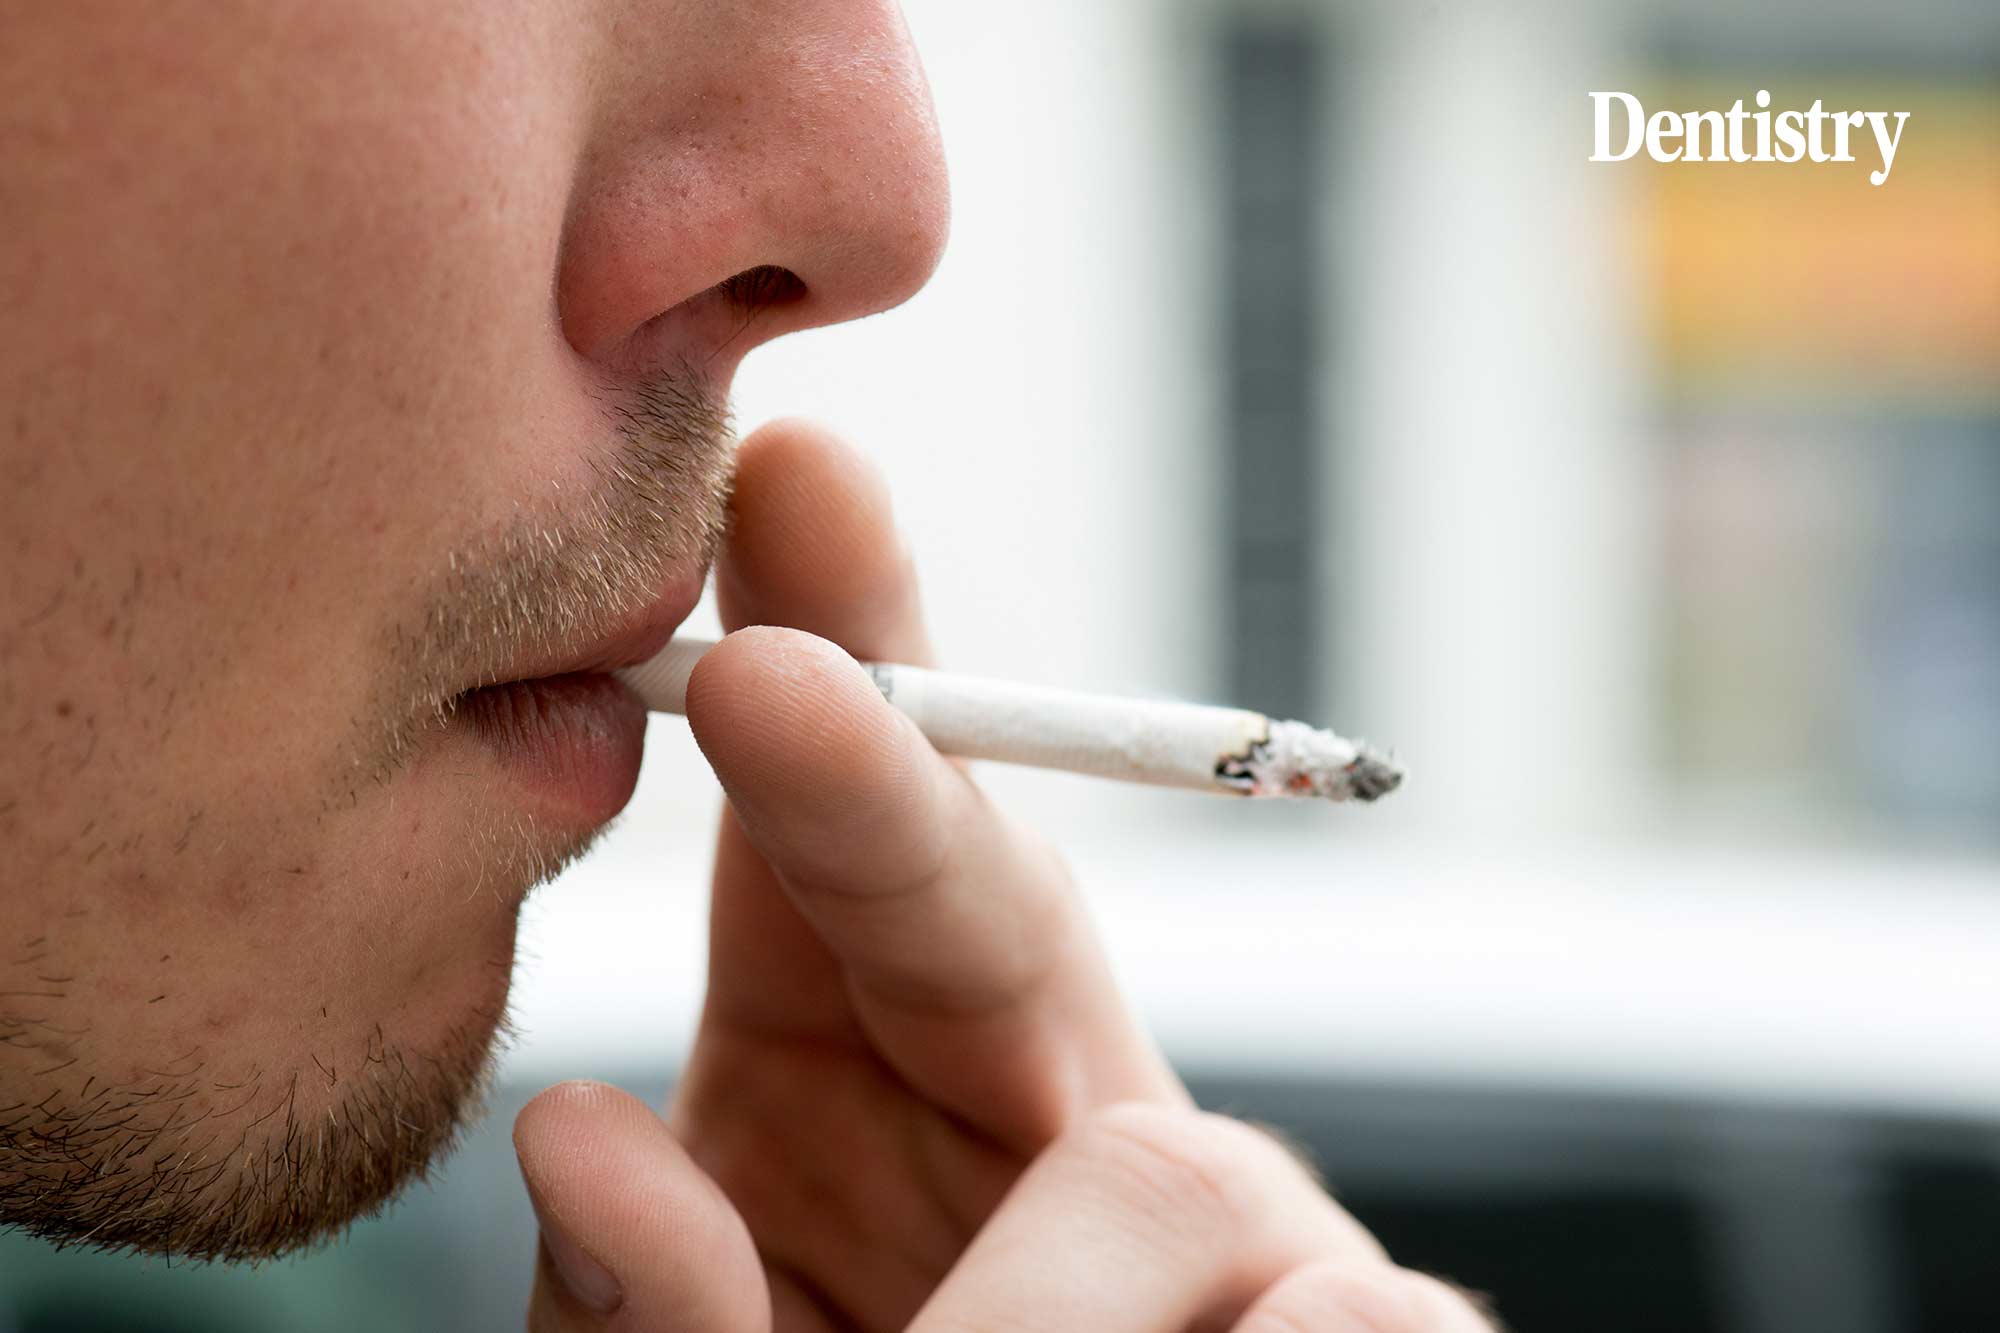 A new report says the government has failed to deliver on the policies it promised to help reduce smoking rates in England